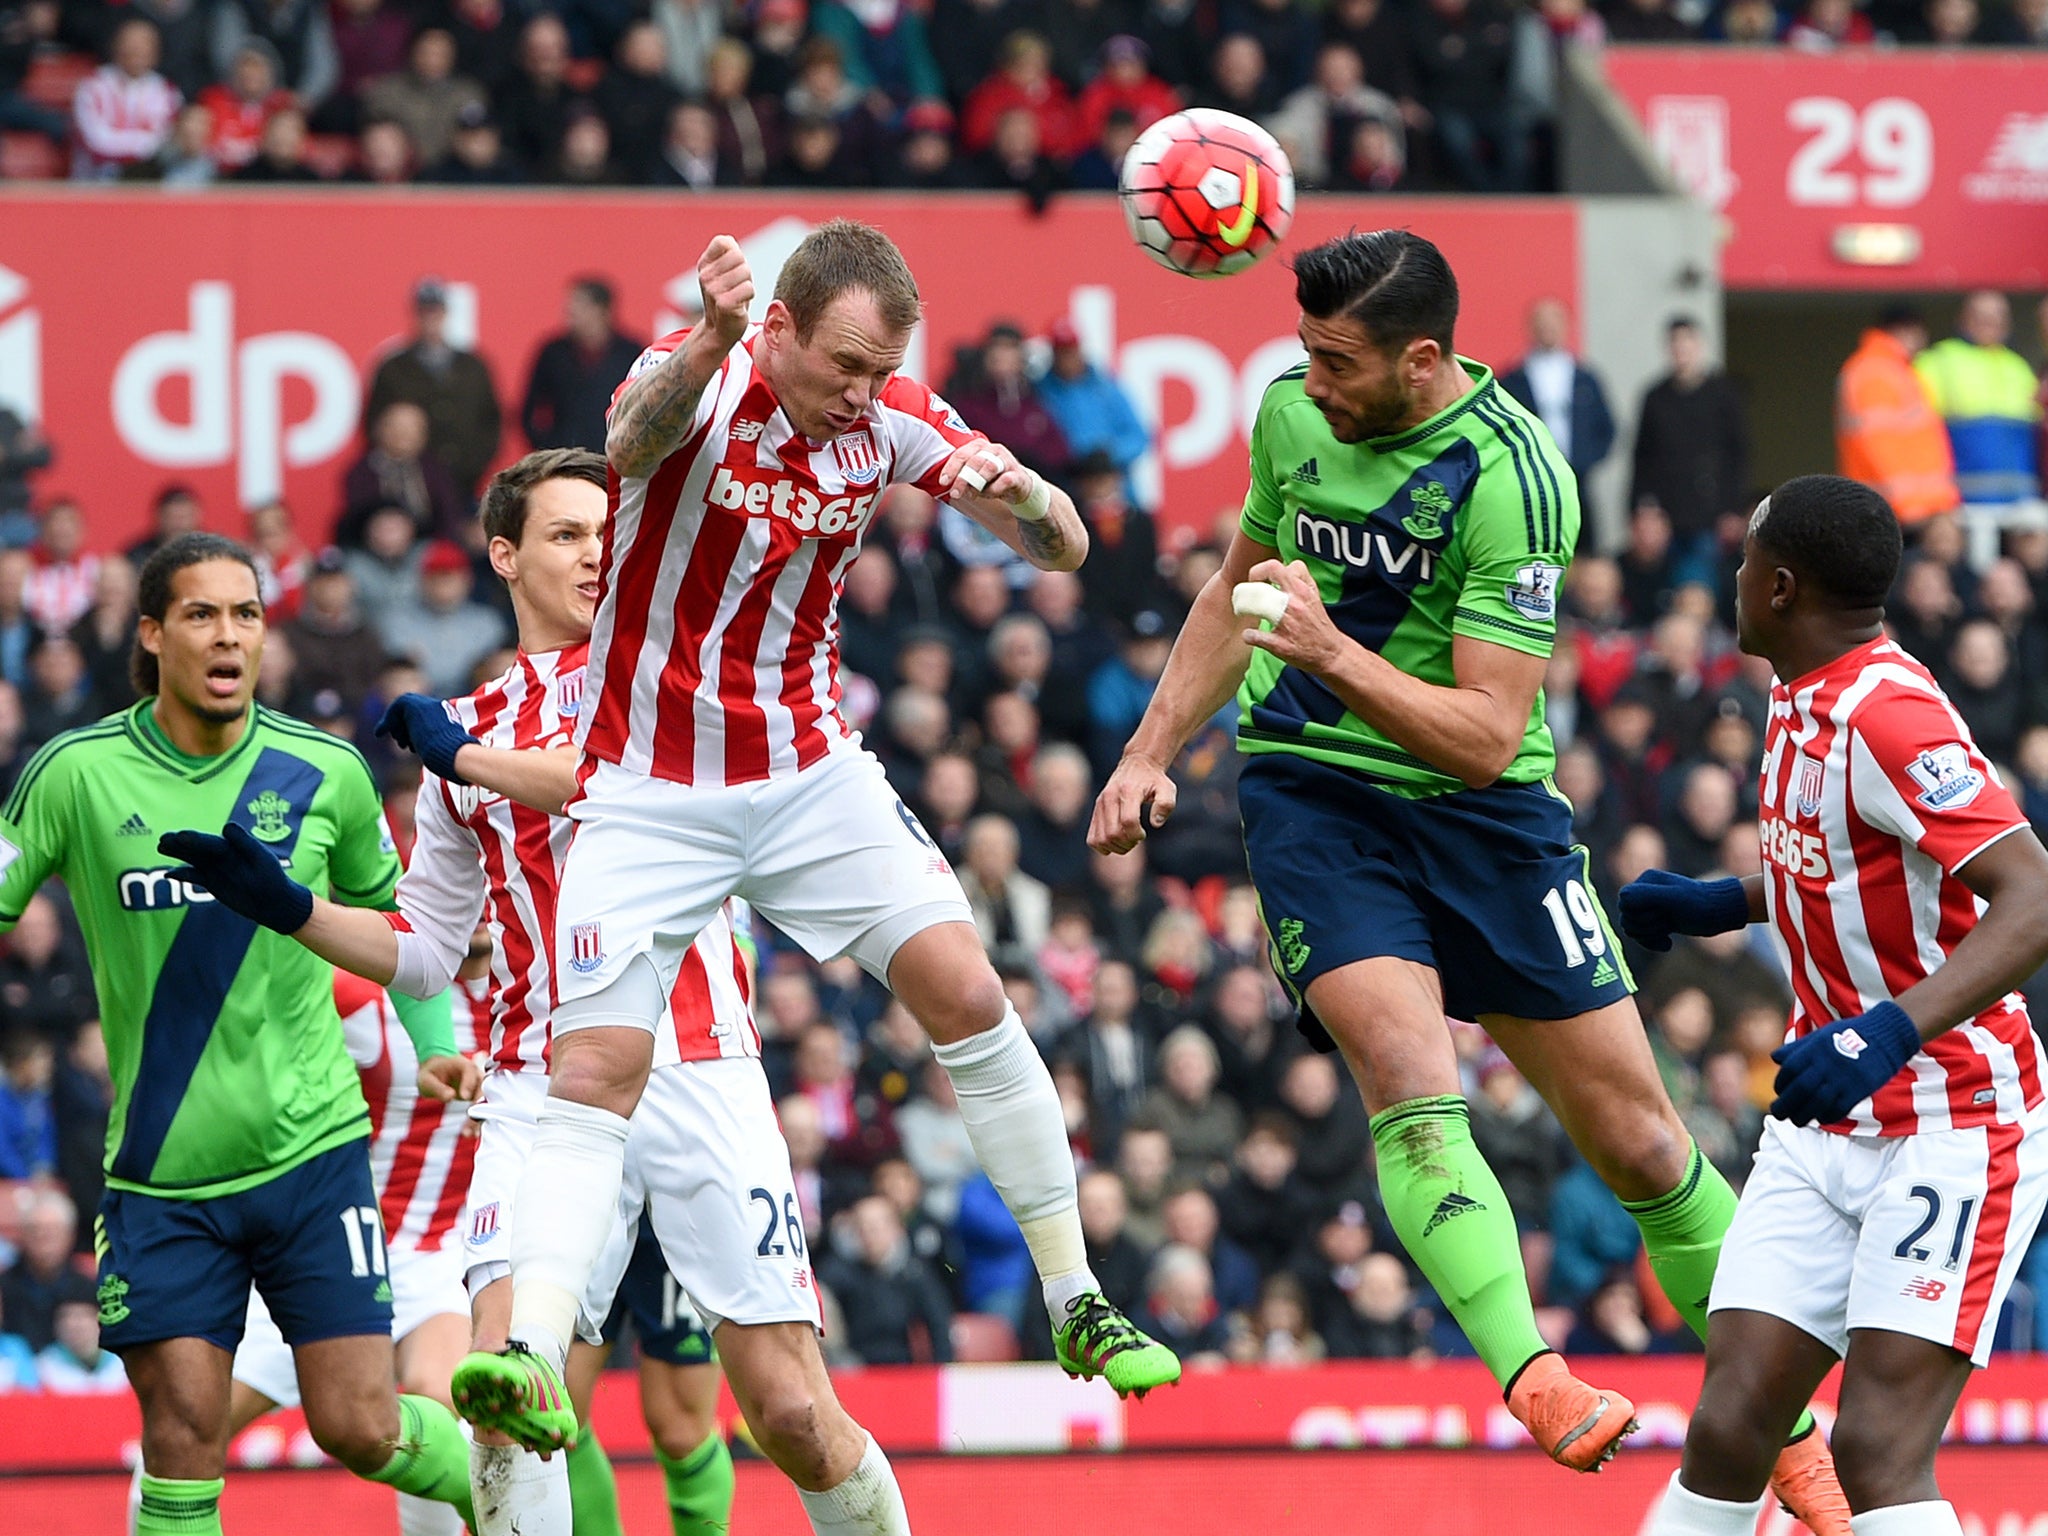 Southampton striker Graziano Pelle heads home the opening goal